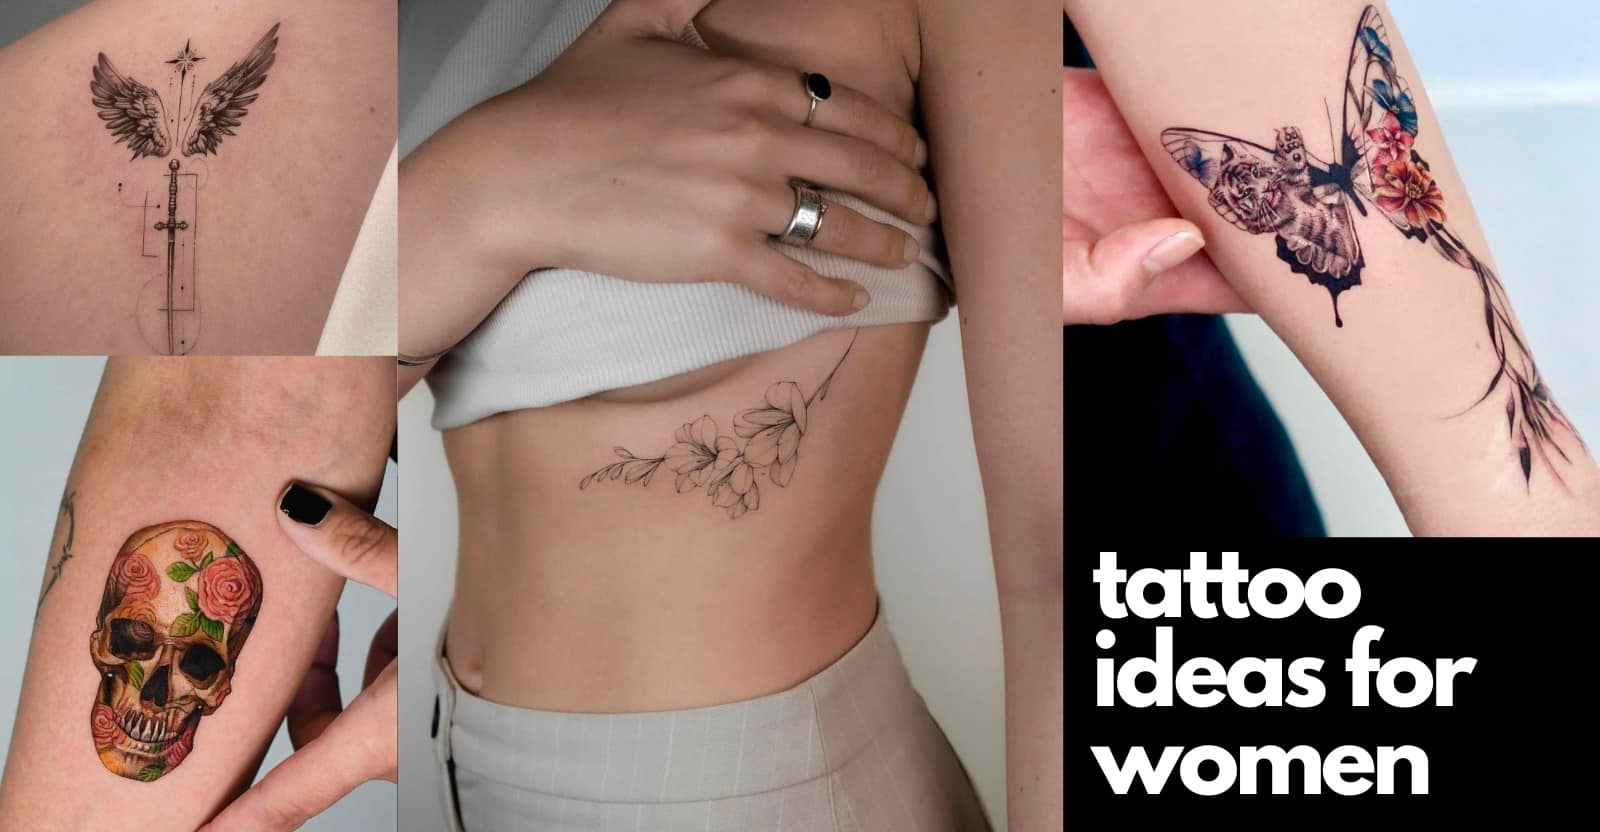 Tattoo Ideas for Women Big, Small and Meaningful Tattoos | PixOrange